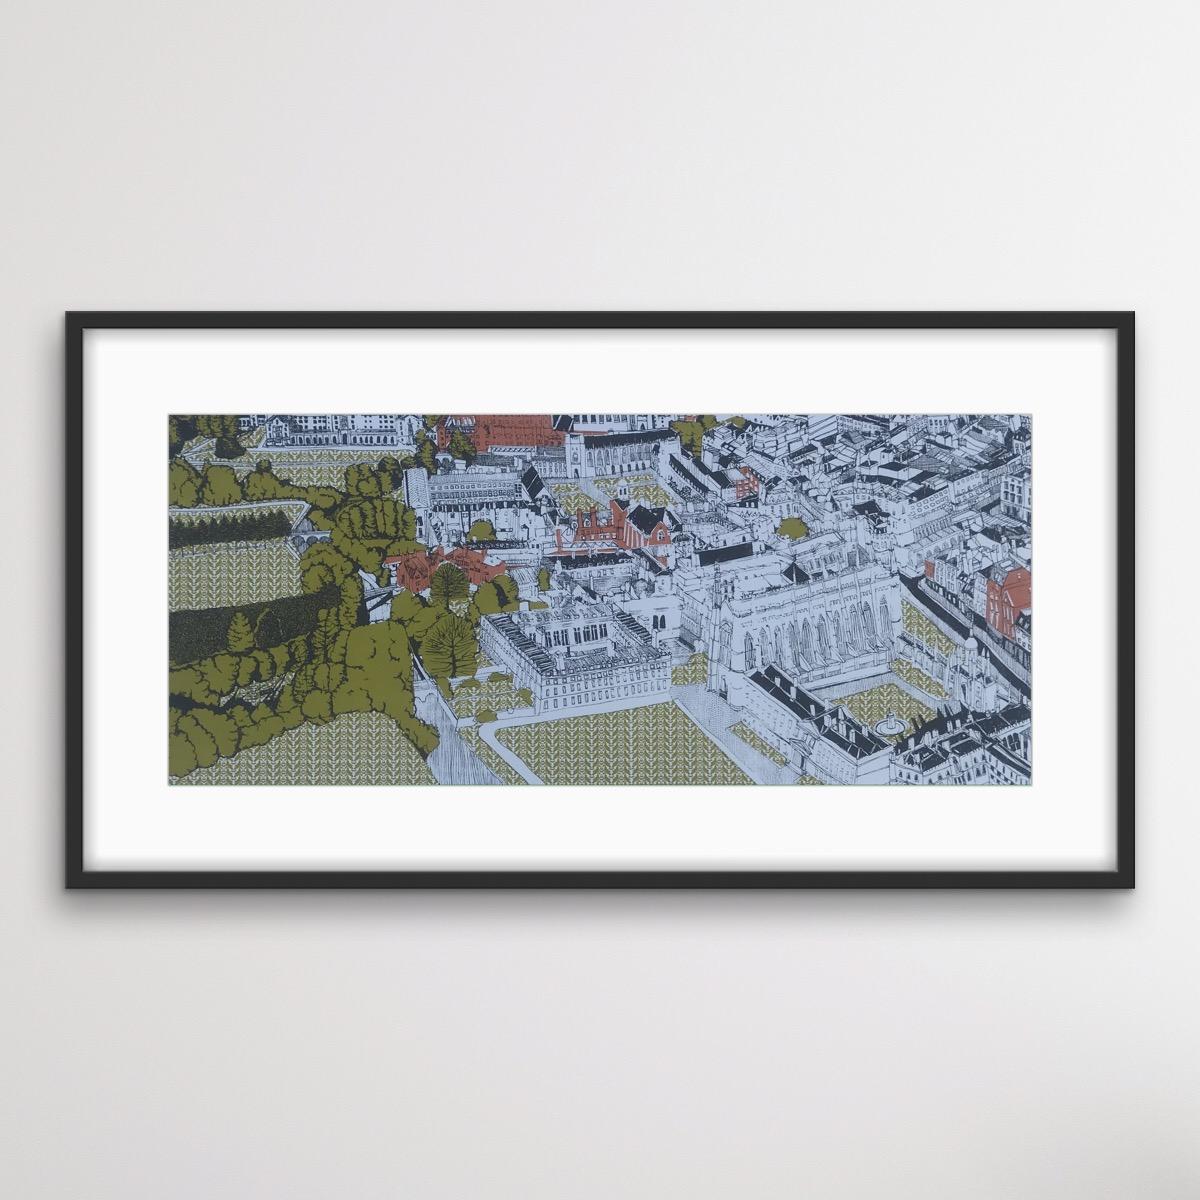 Clare Halifax, Aerial View of Cambridge, Limited Edition Print, City Scape Art For Sale 1